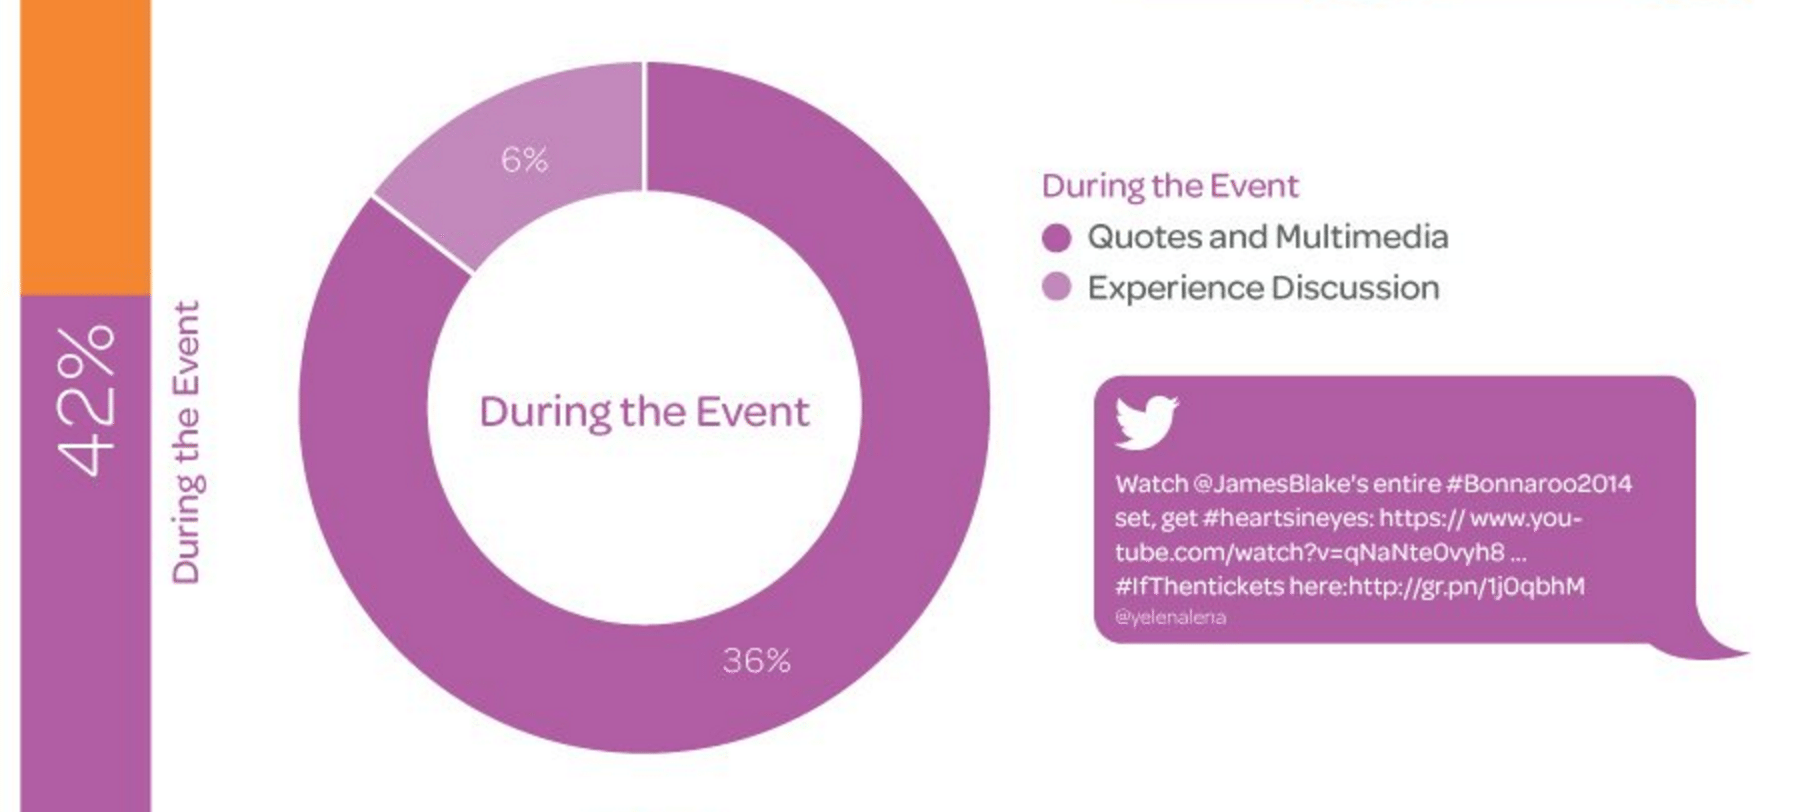 Social media event marketing - during the event